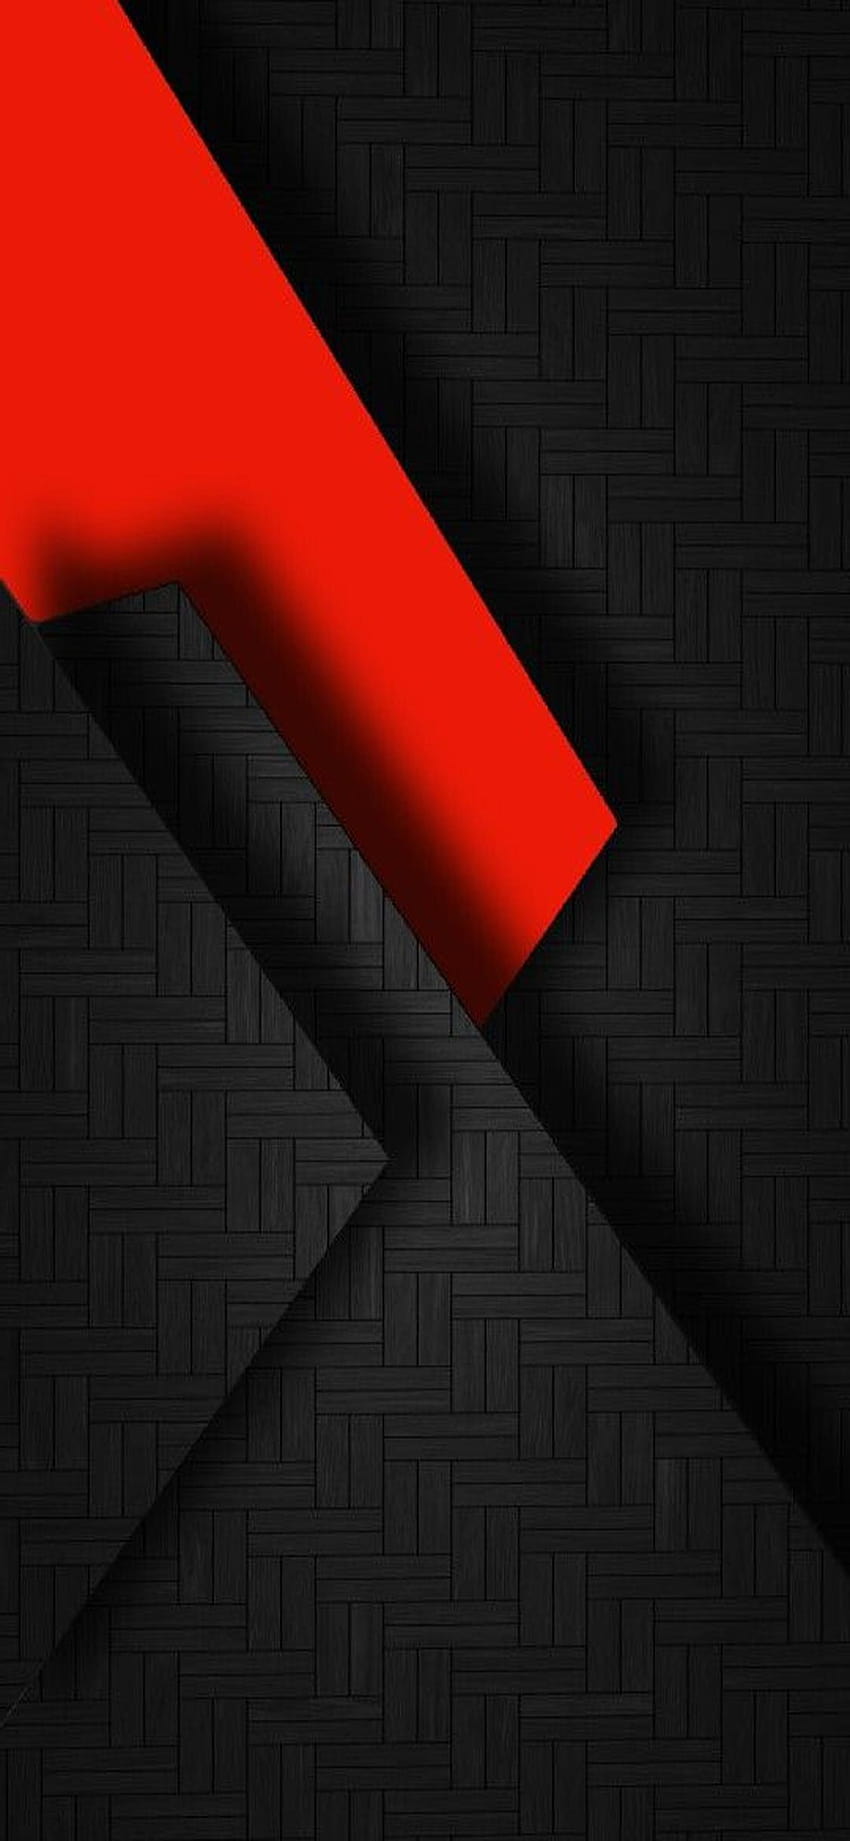 Clean iPhone X for anyone who likes black and red, iphone x black HD phone wallpaper